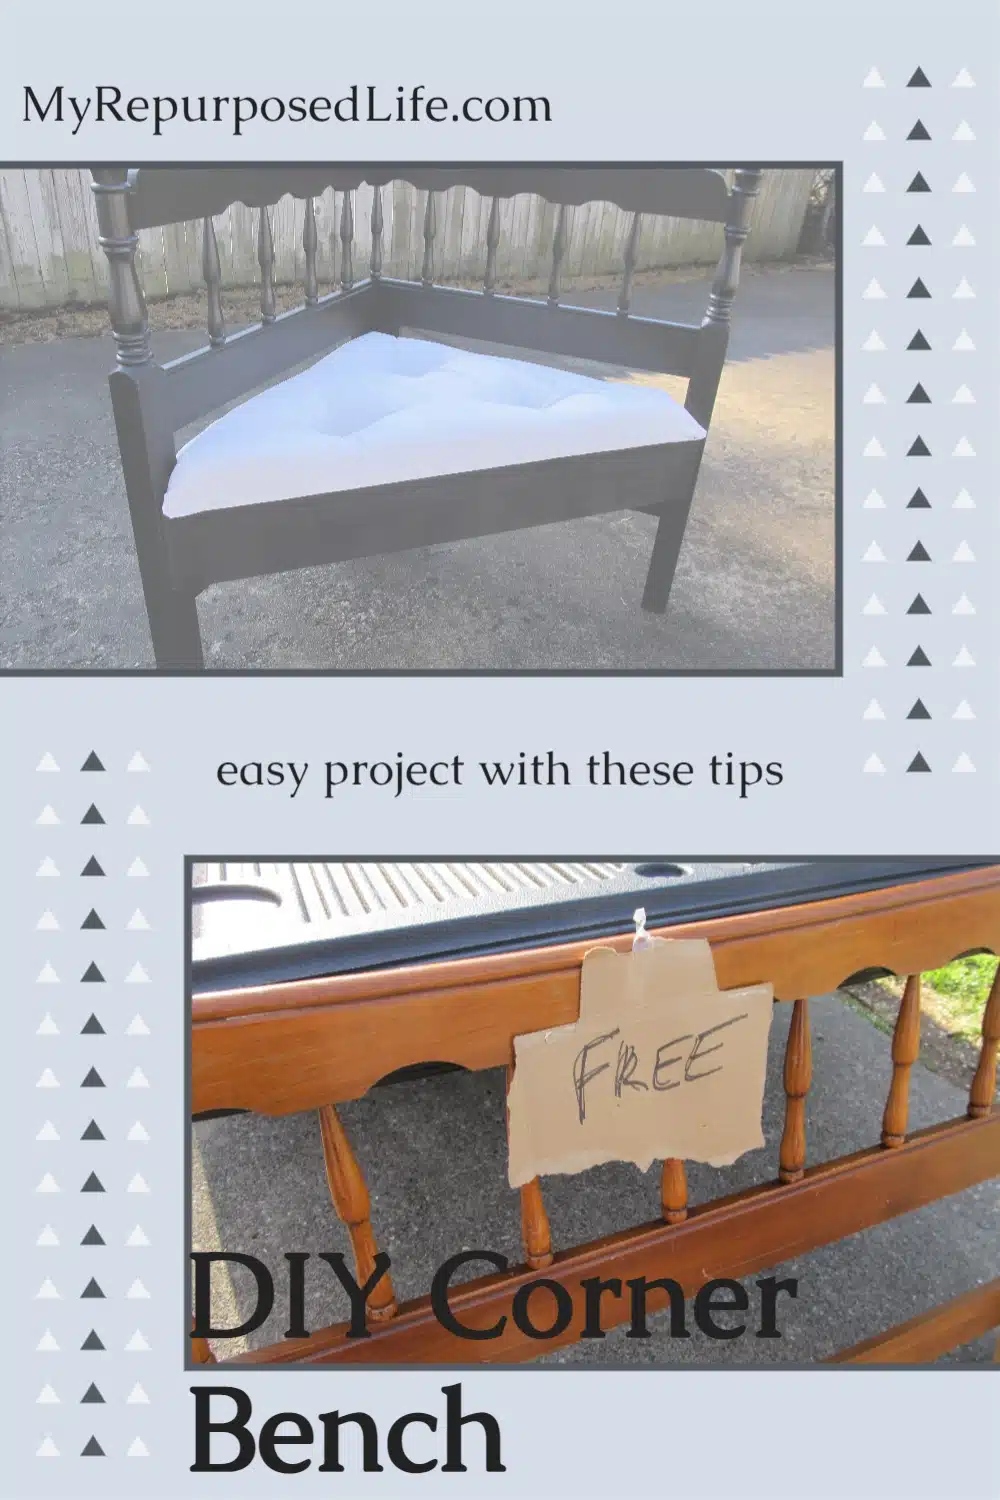 How to make a headboard corner bench using a full sized headboard. A corner bench made from a headboard is easier than it sounds, fits nicely in your home. #MyRepurposedLife #upcyle #headboard via @repurposedlife